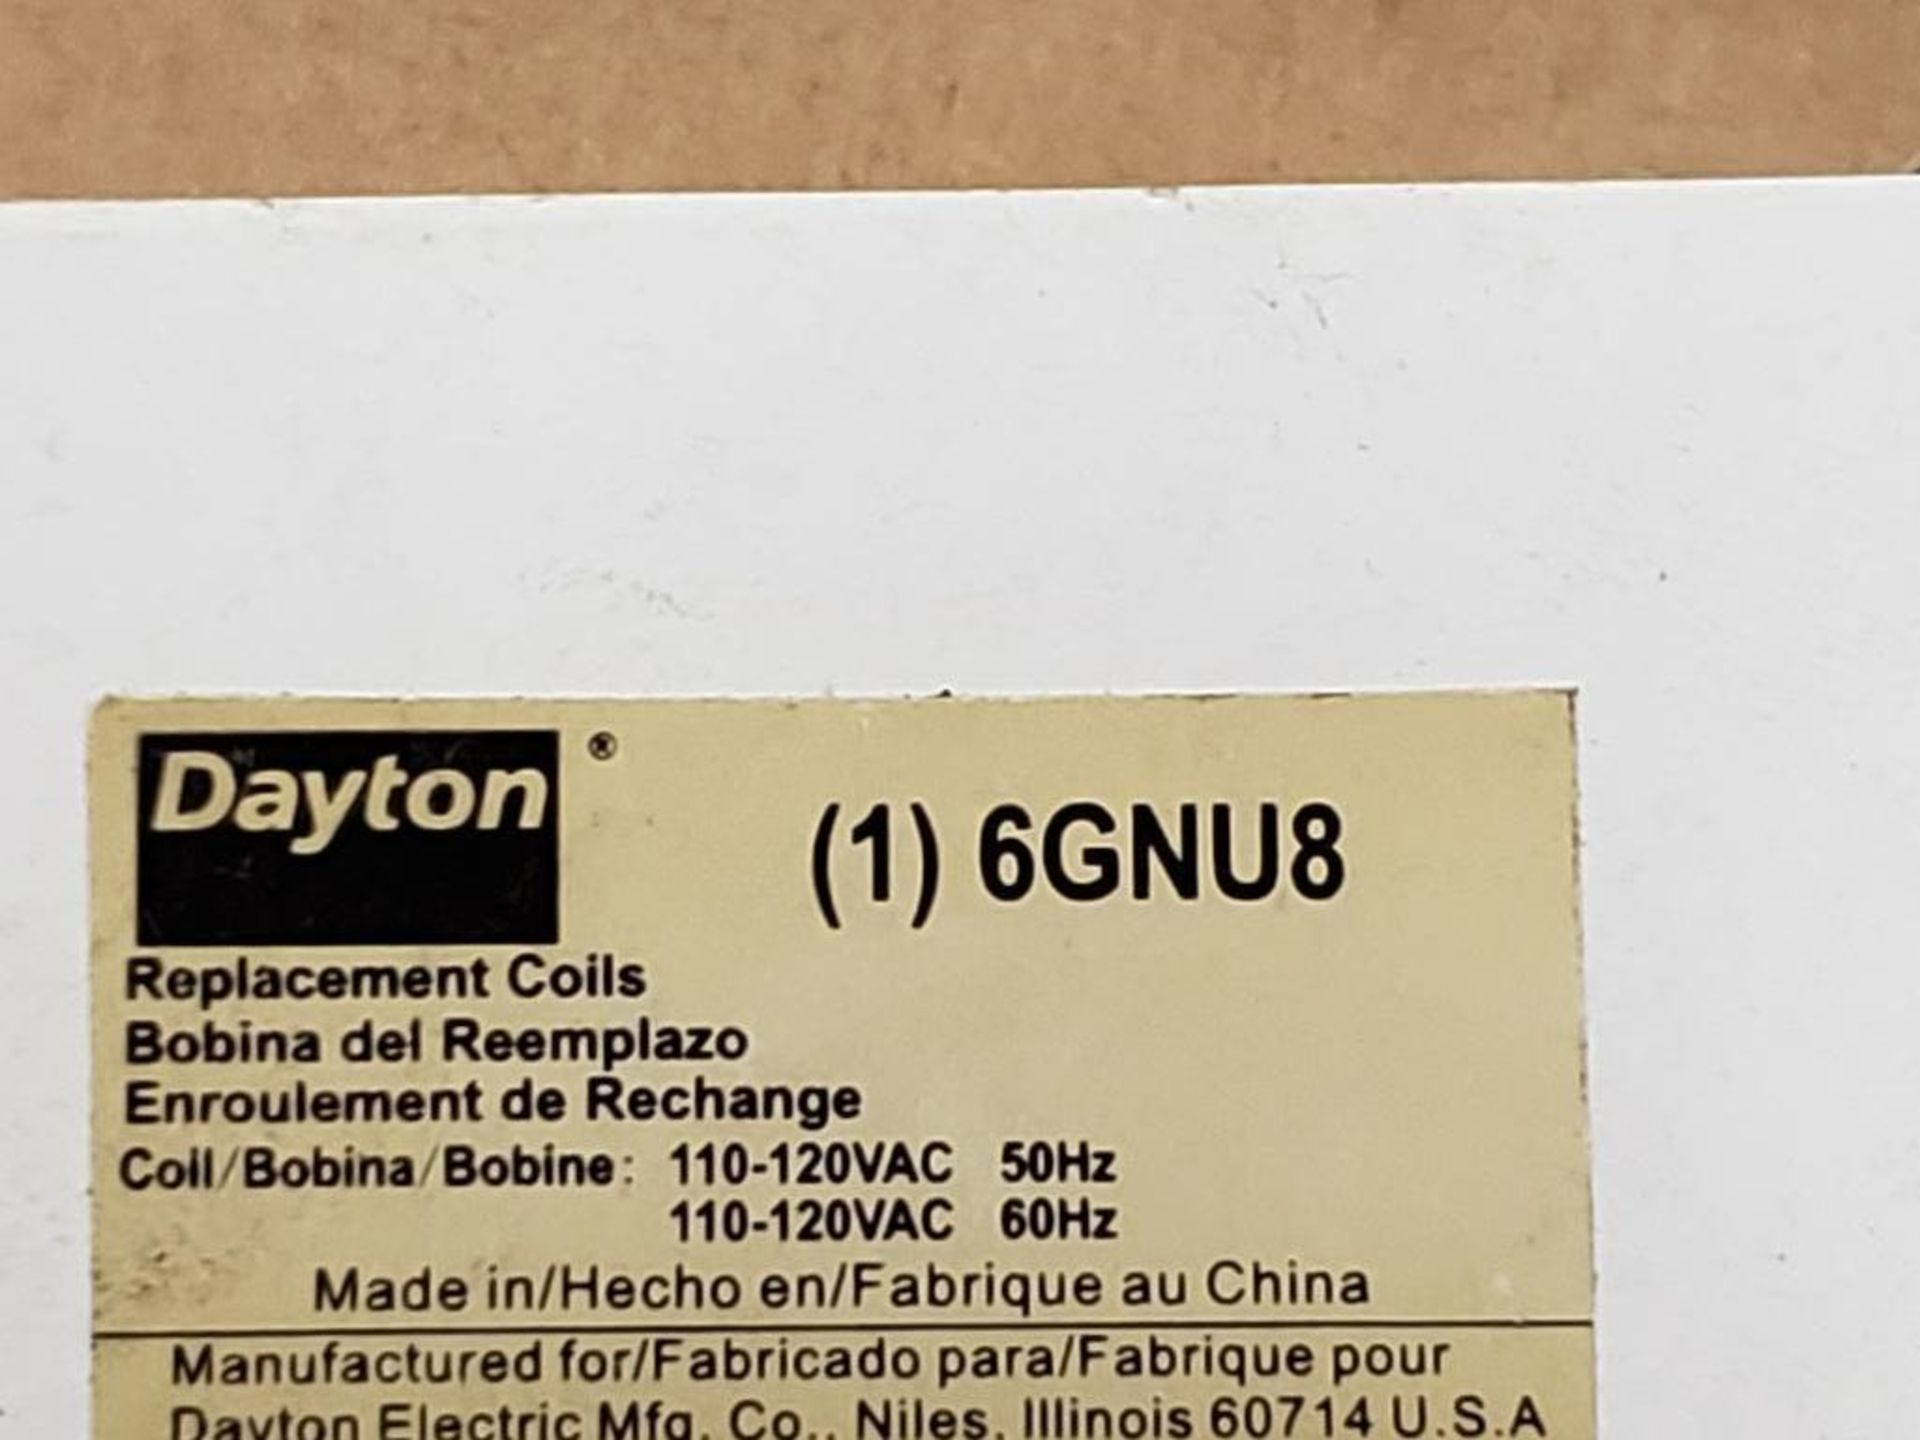 Qty 24 - Dayton 6GNU8 replacement coils. New in box. - Image 2 of 2